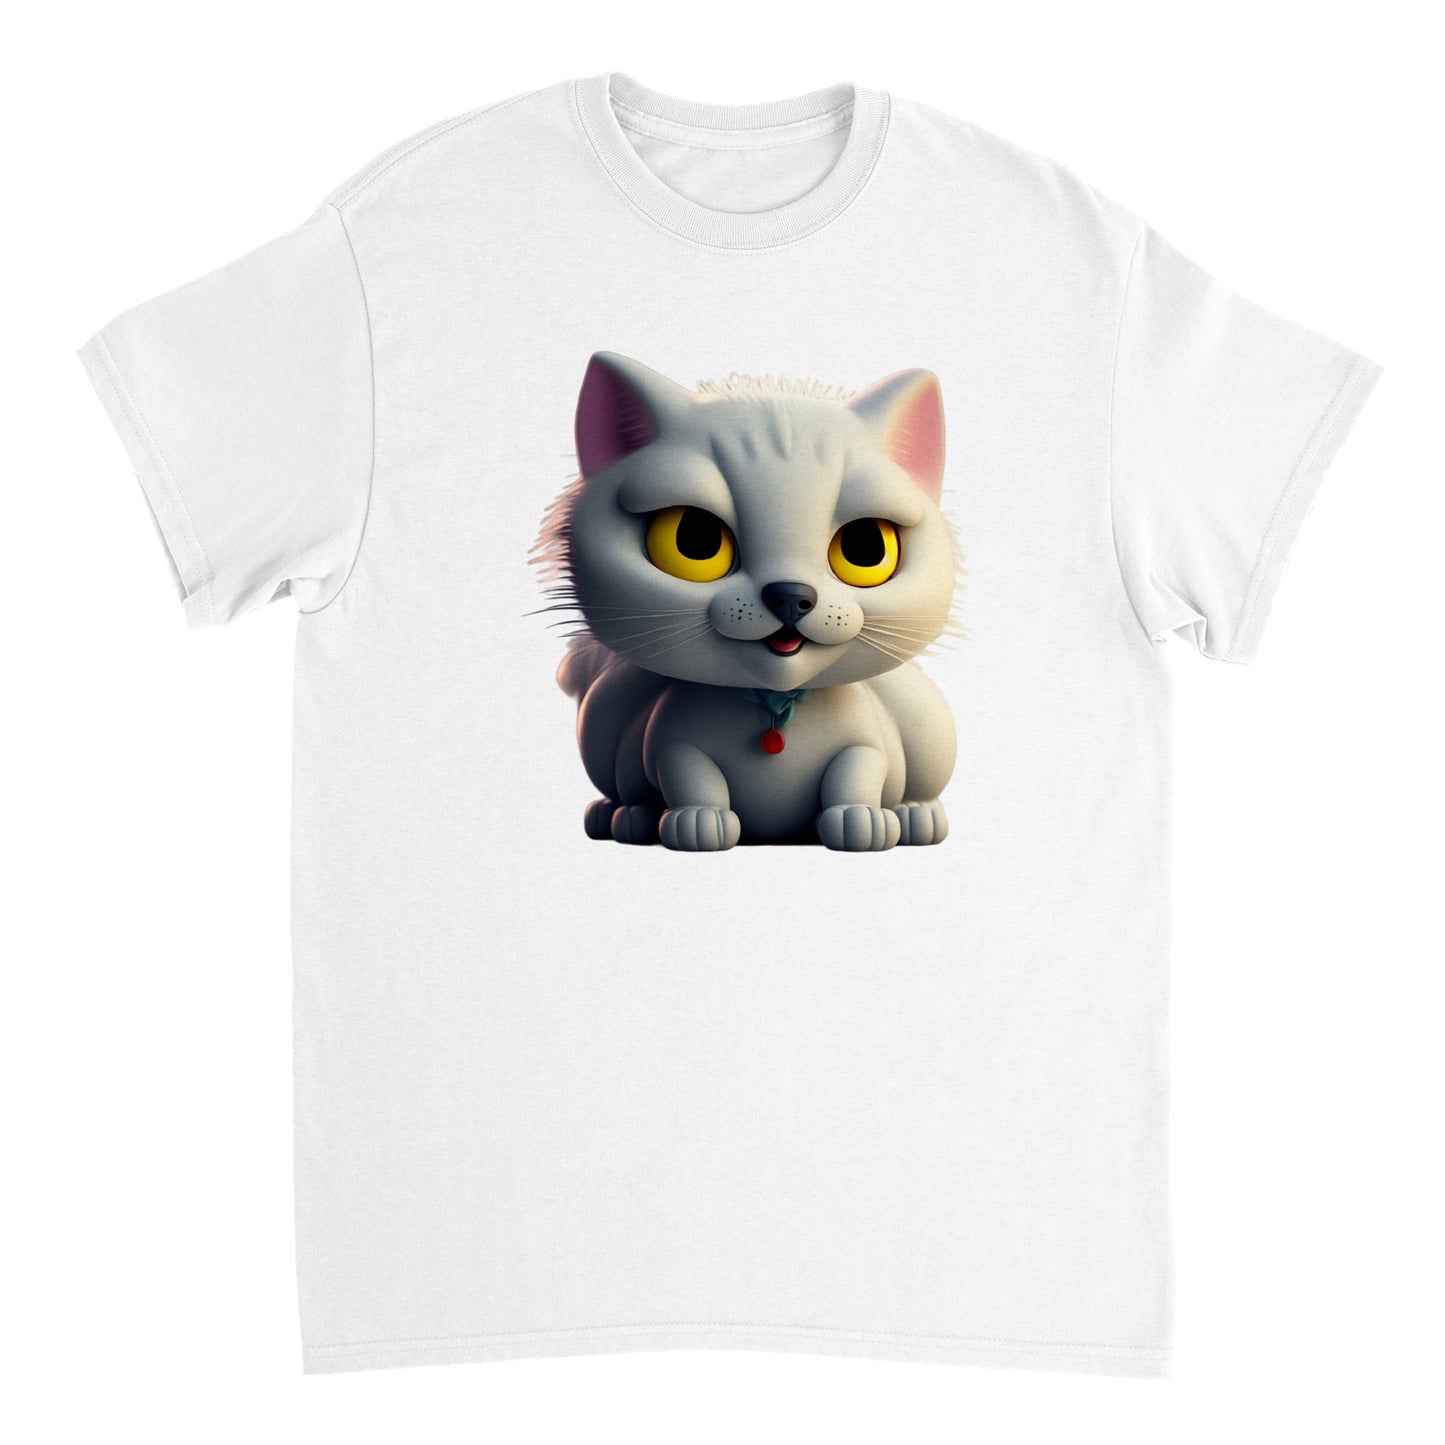 Adorable, Cool, Cute Cats and Kittens Toy - Heavyweight Unisex Crewneck T-shirt 52